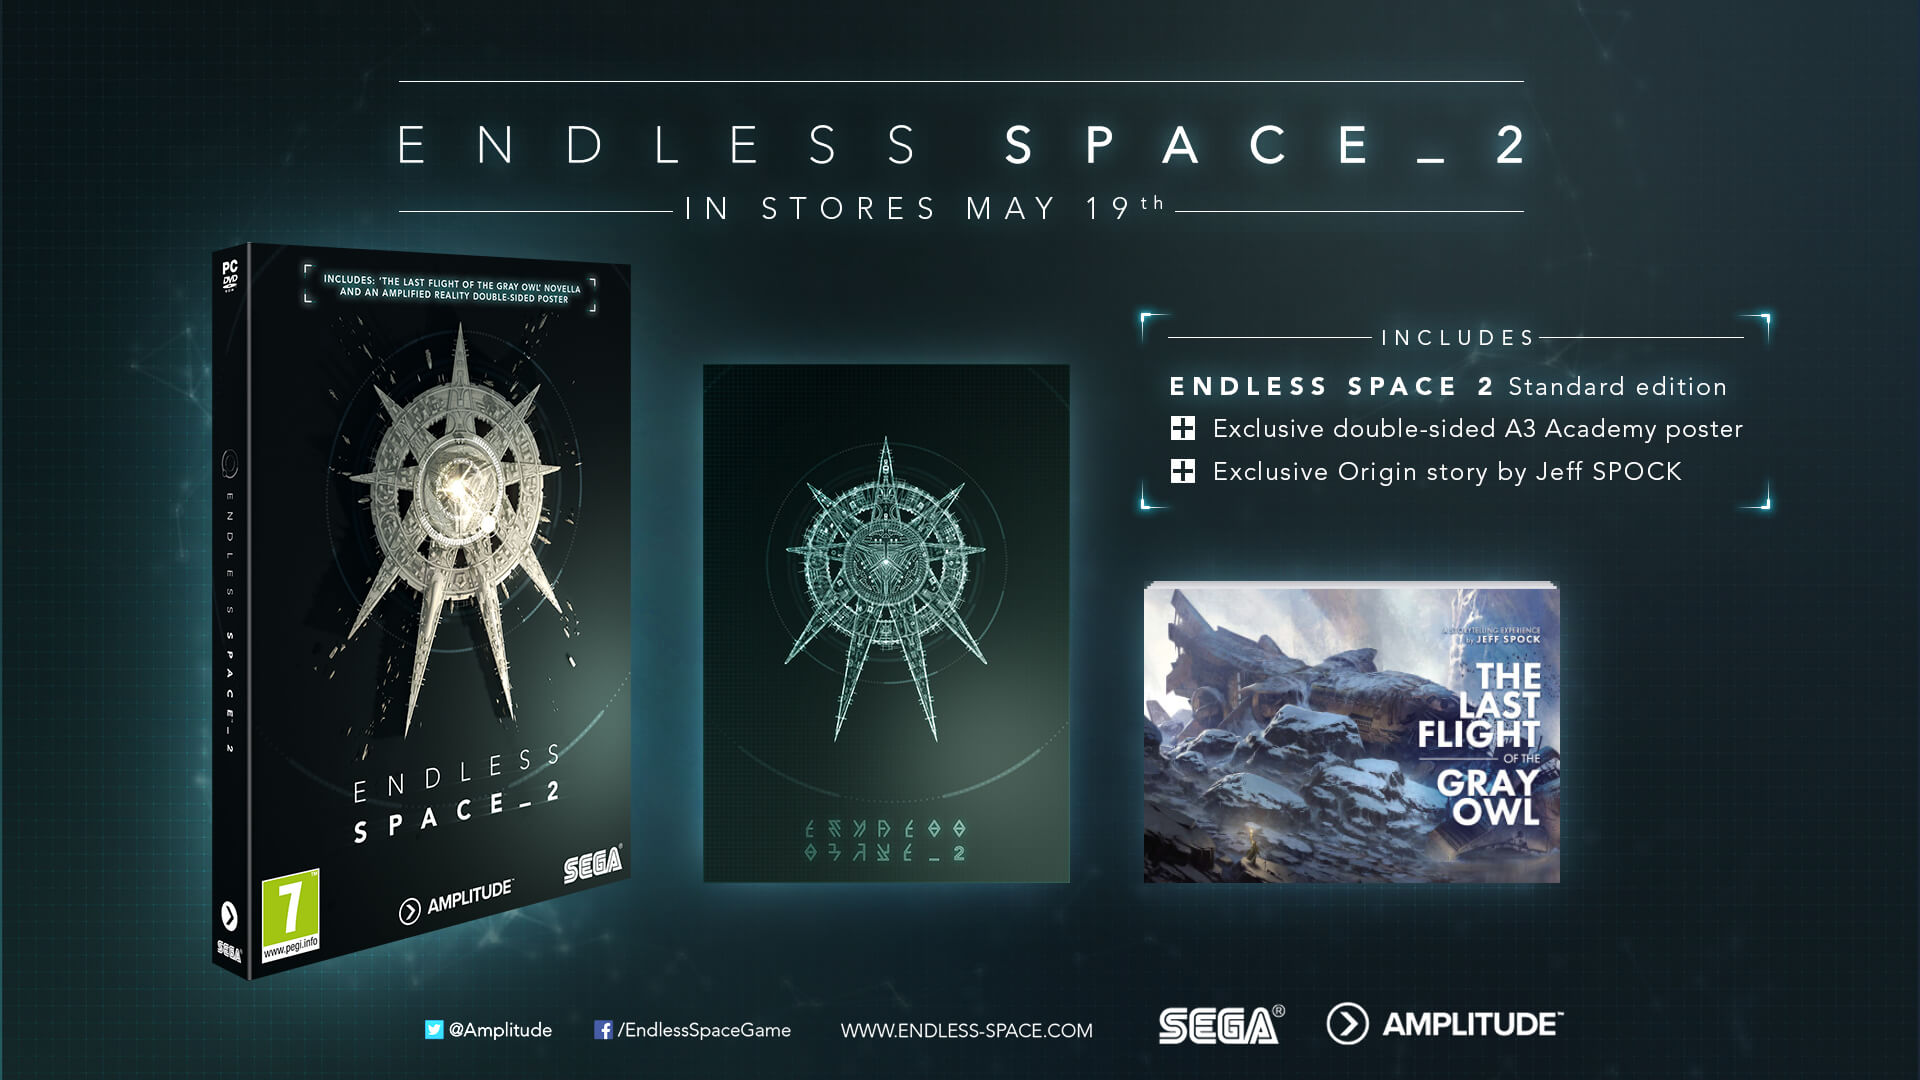 Endless-Space-release-retail